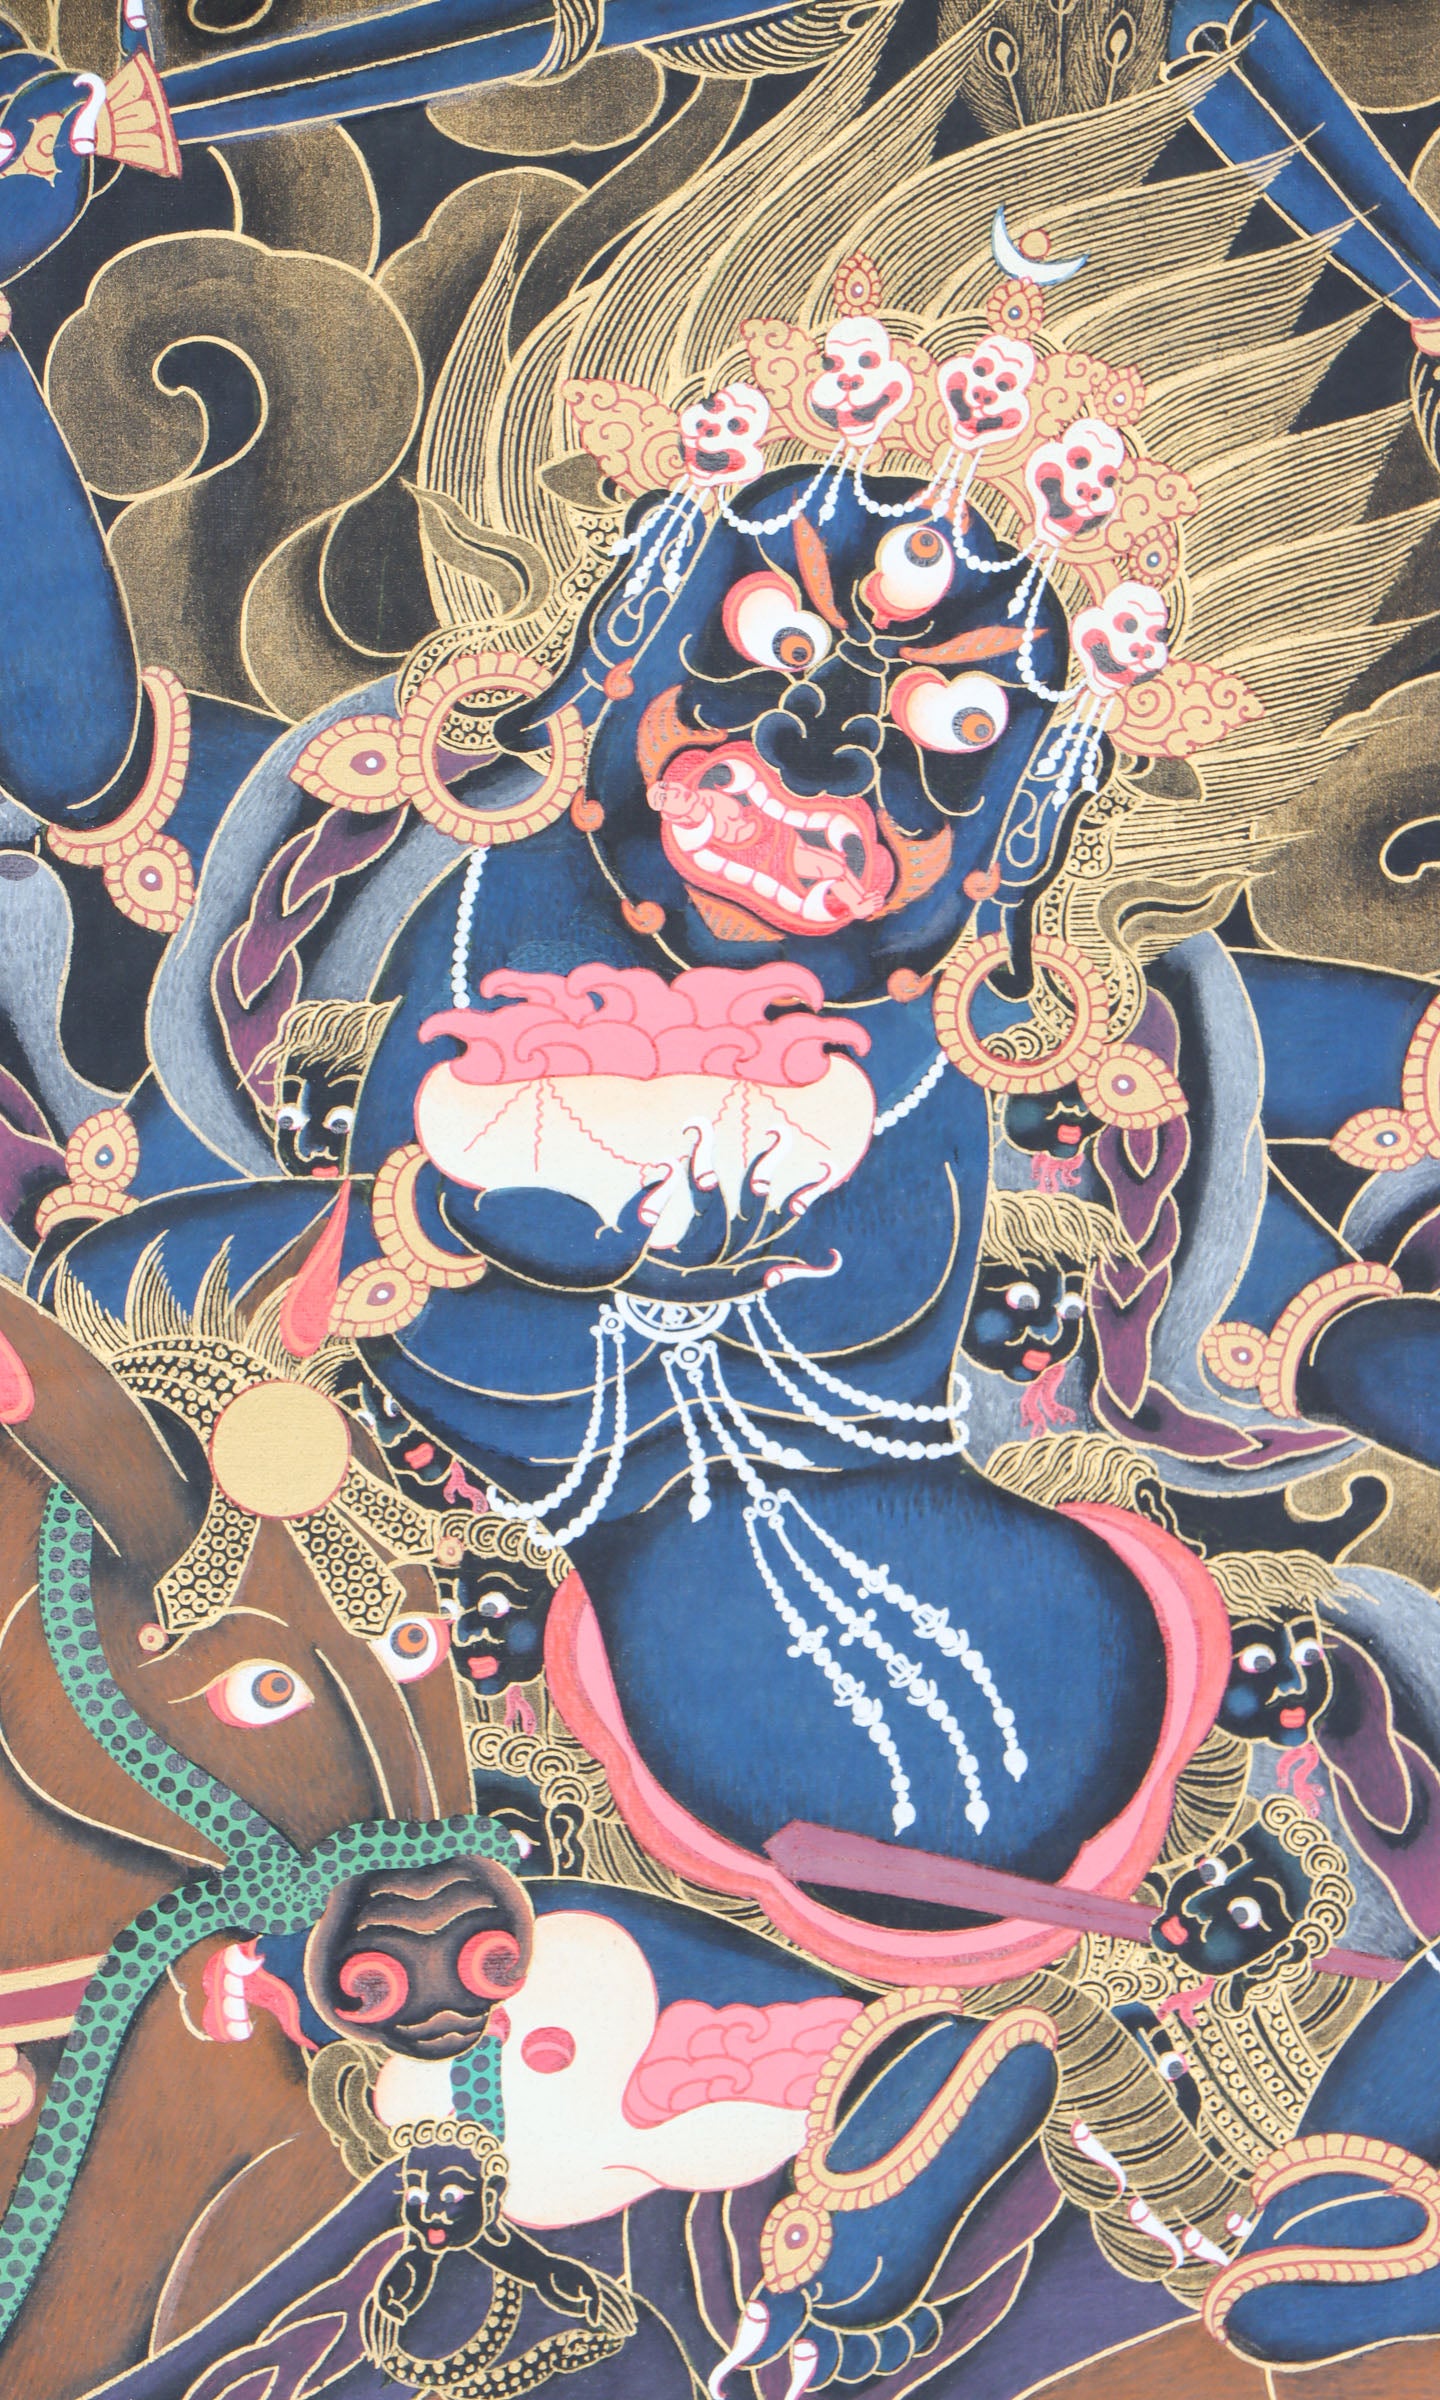 Palden Lhamo Thangka for guidance and protection.